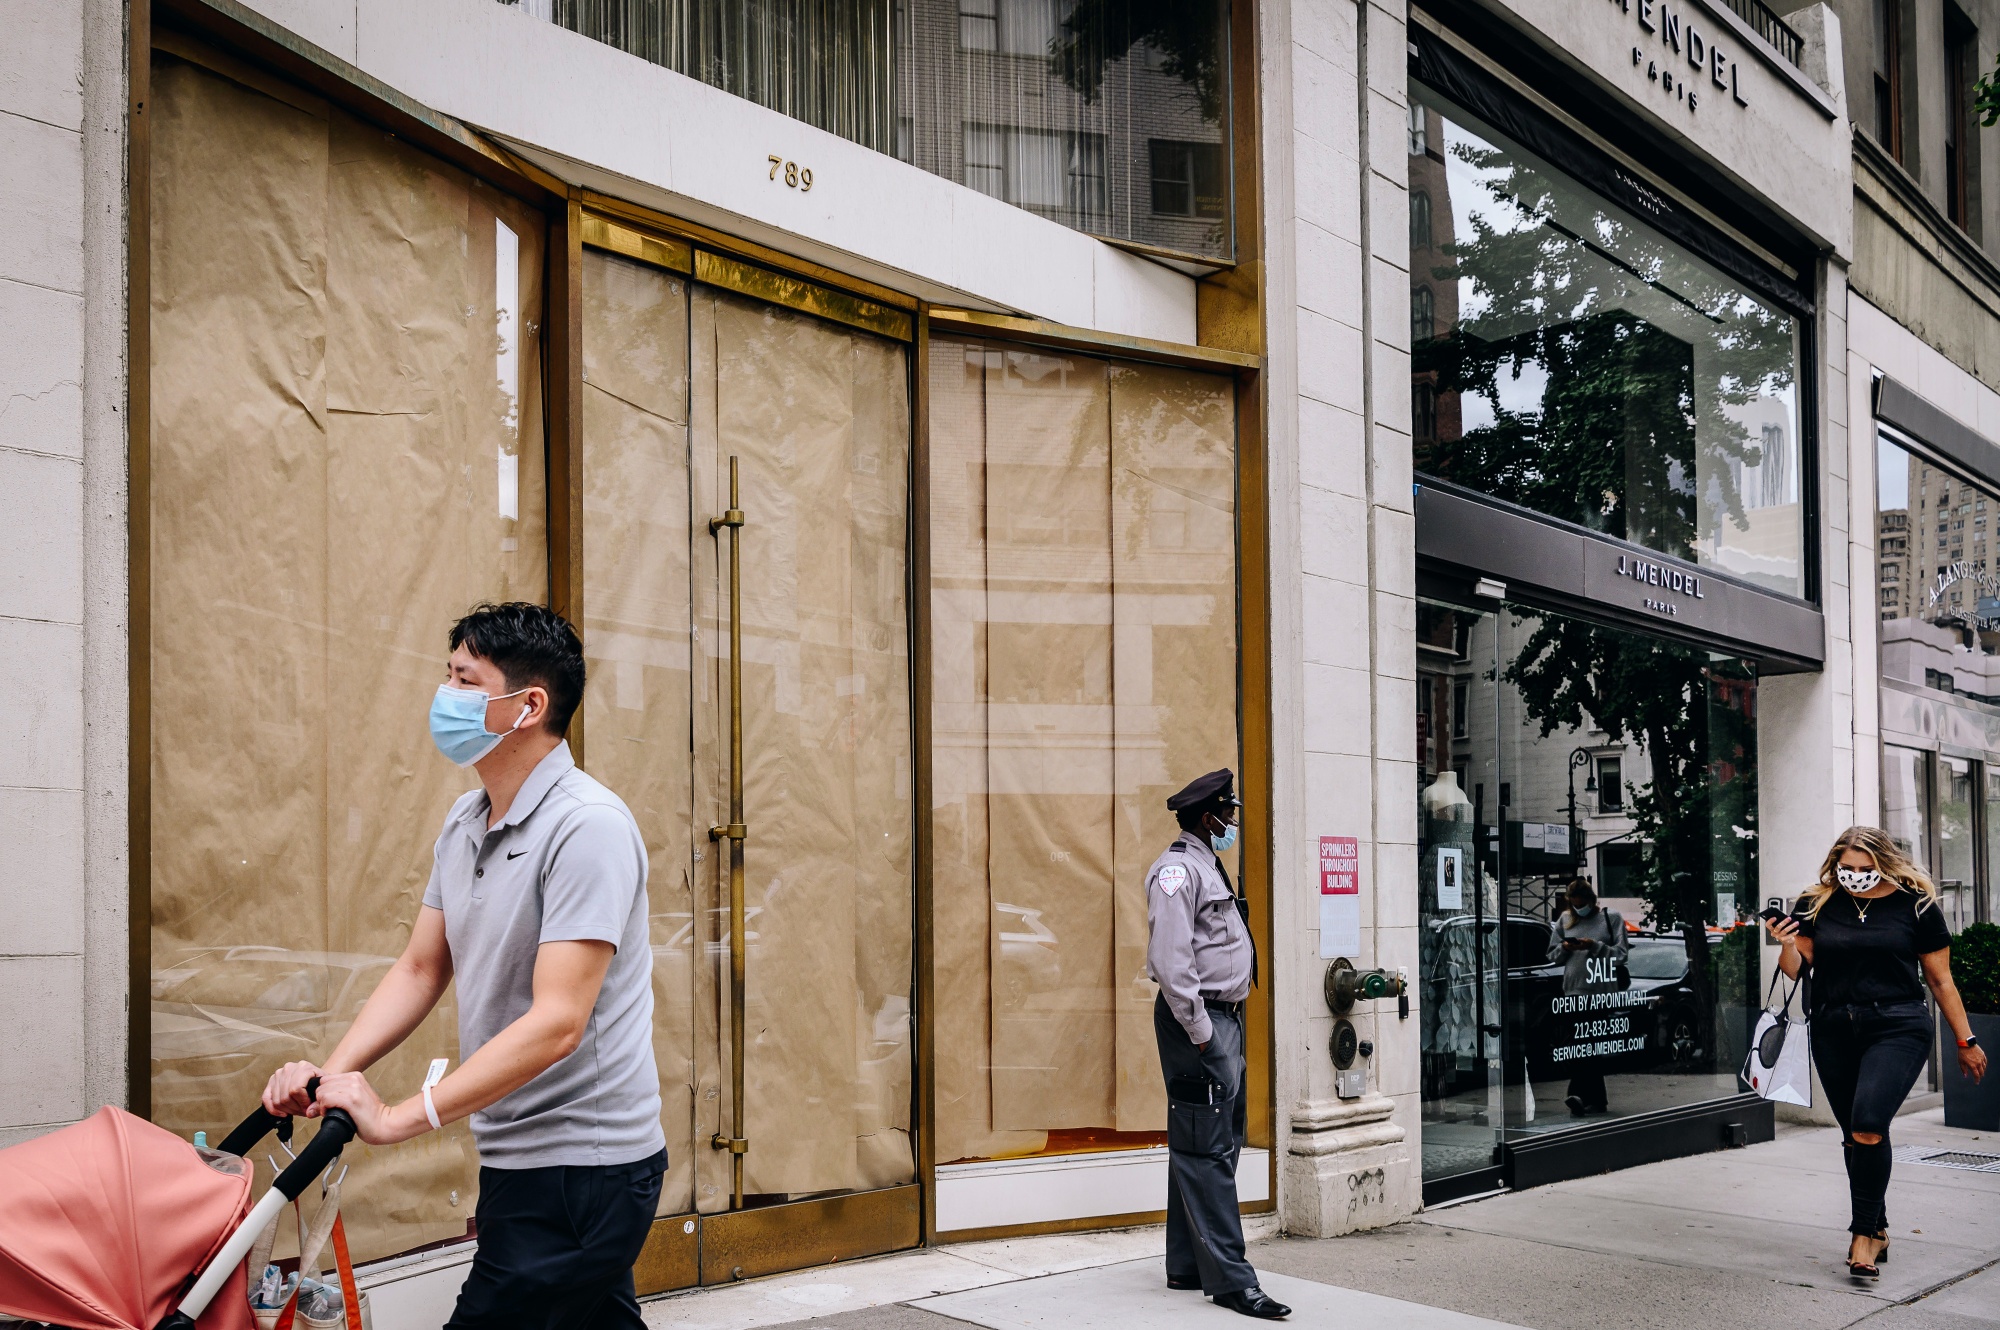 Pedestrians pass by a closed storefront on Madison Avenue.